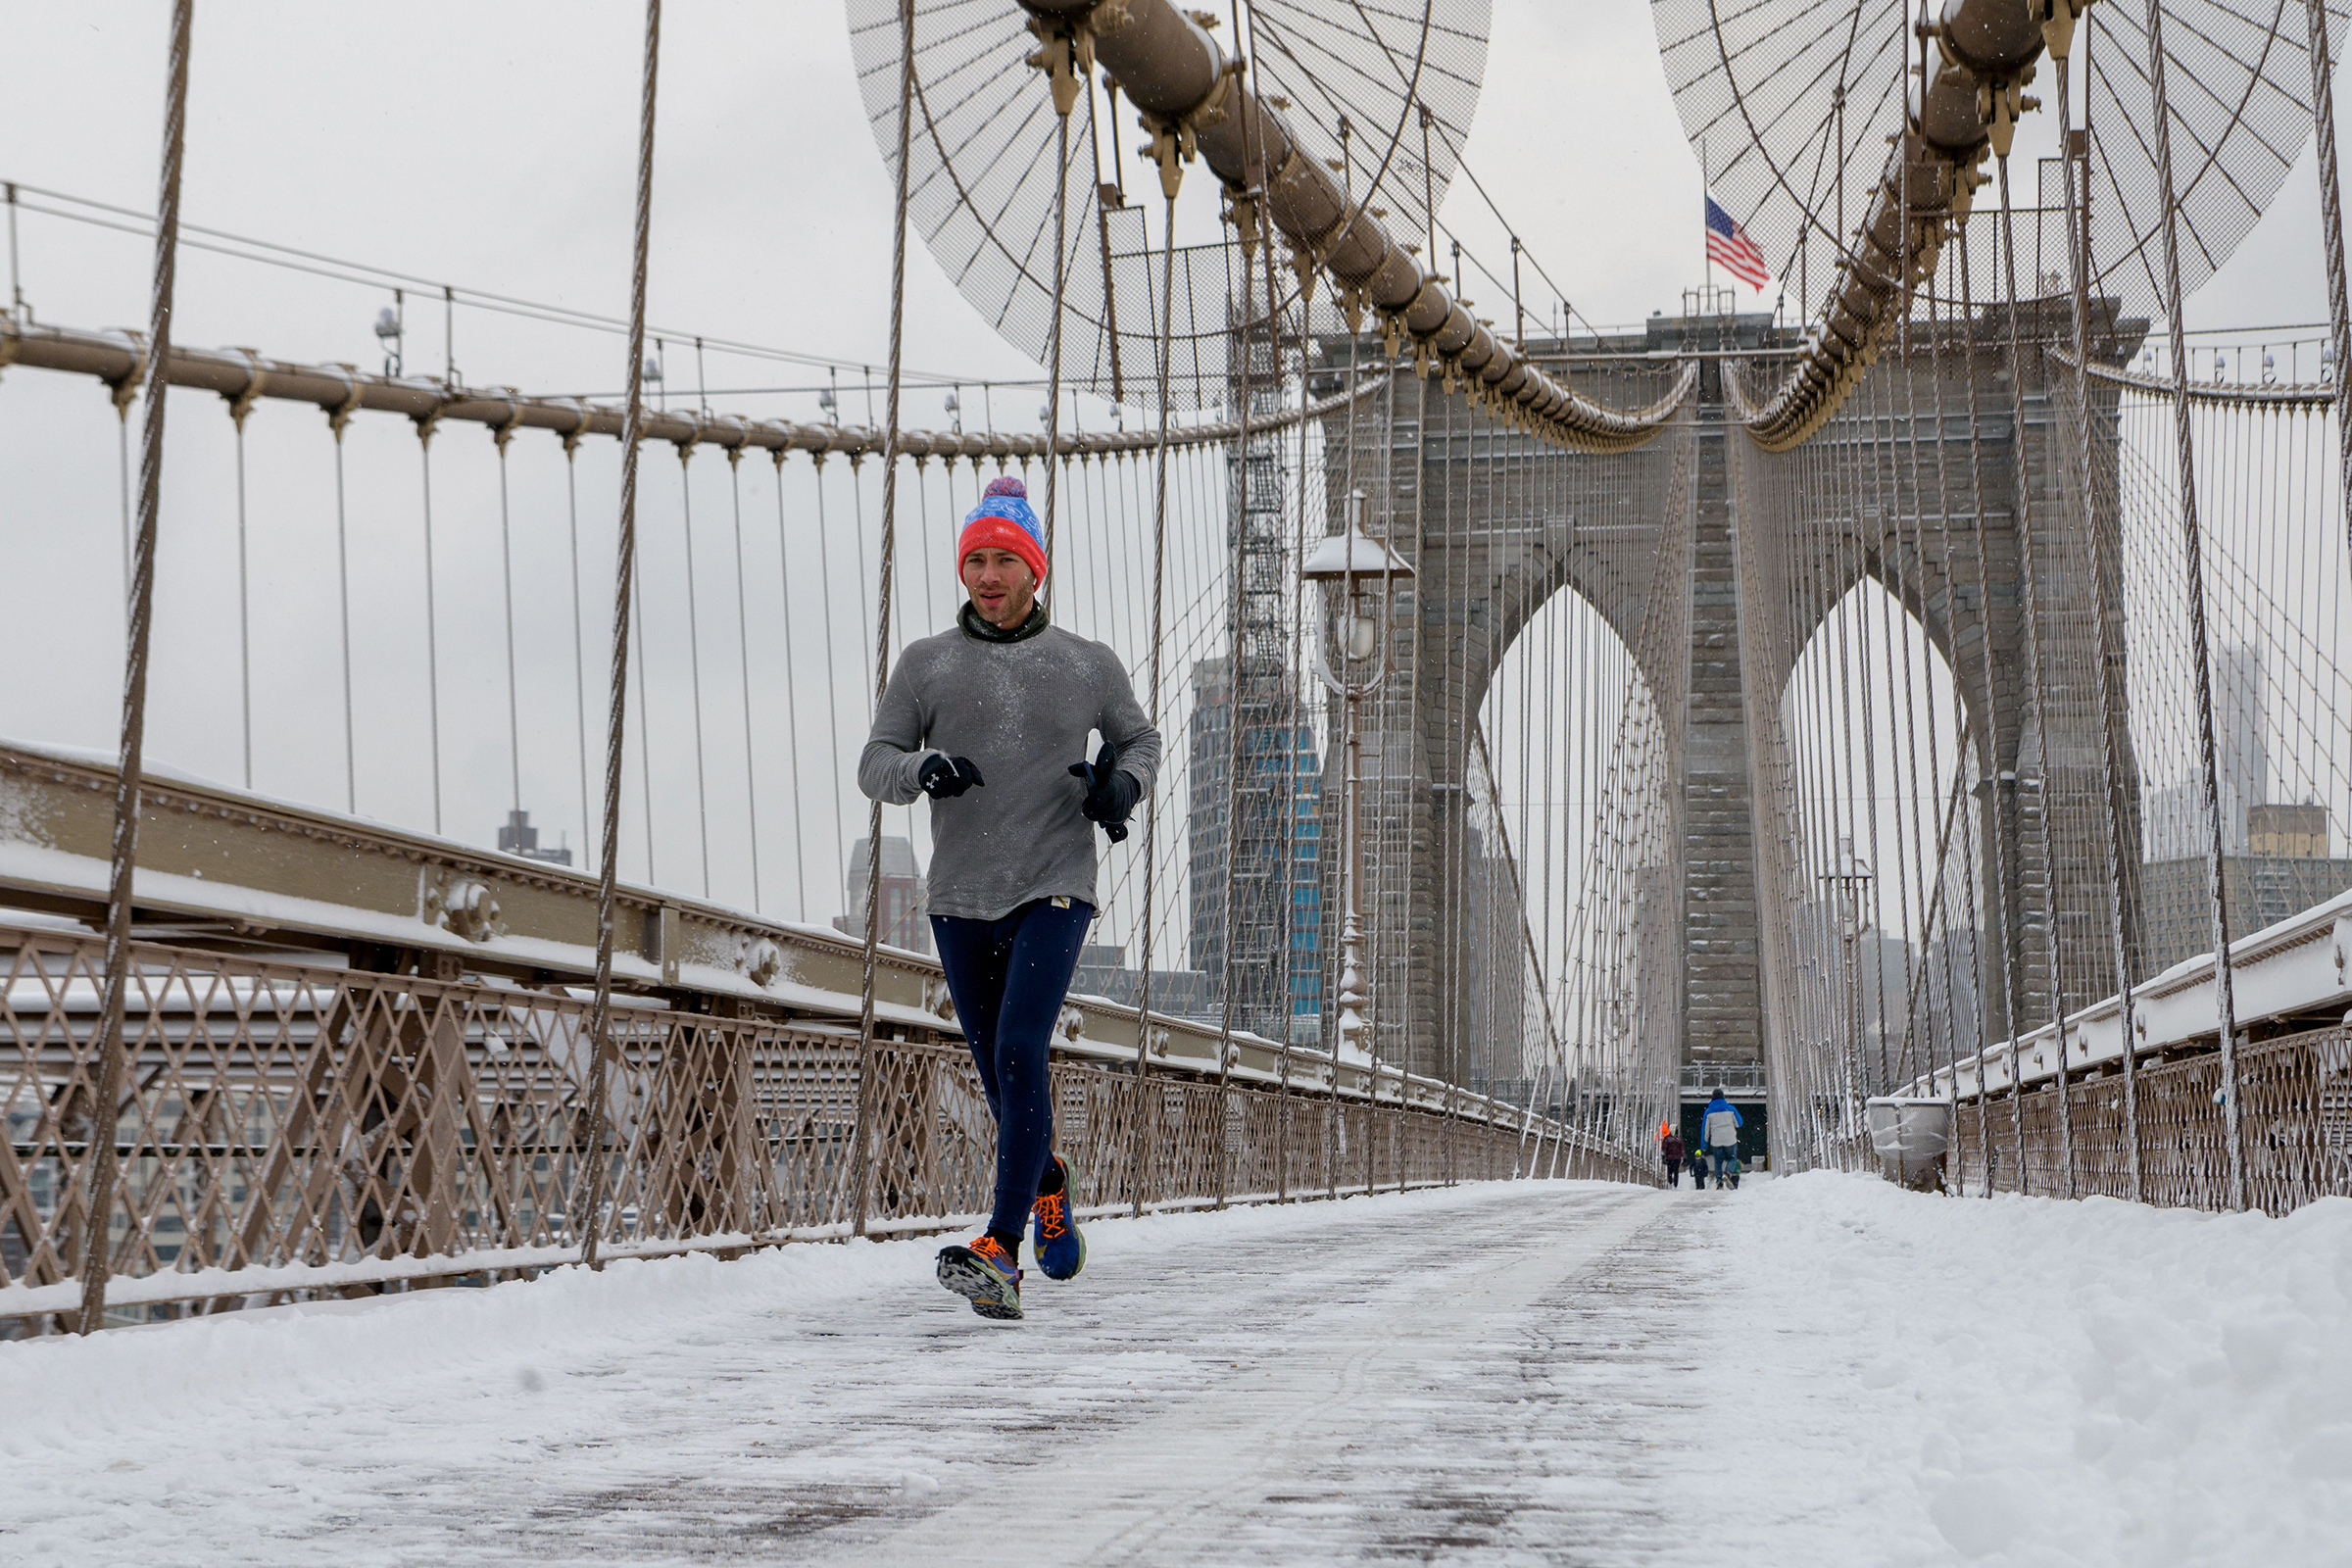 A runner crosses the Brooklyn Bridge during the first snow storm of the season on January 7, 2022 in New York City. (Angela Weiss—AFP/Getty Images))